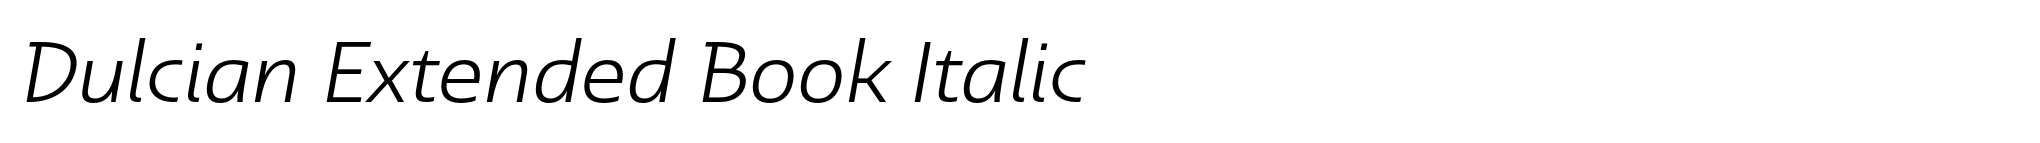 Dulcian Extended Book Italic image